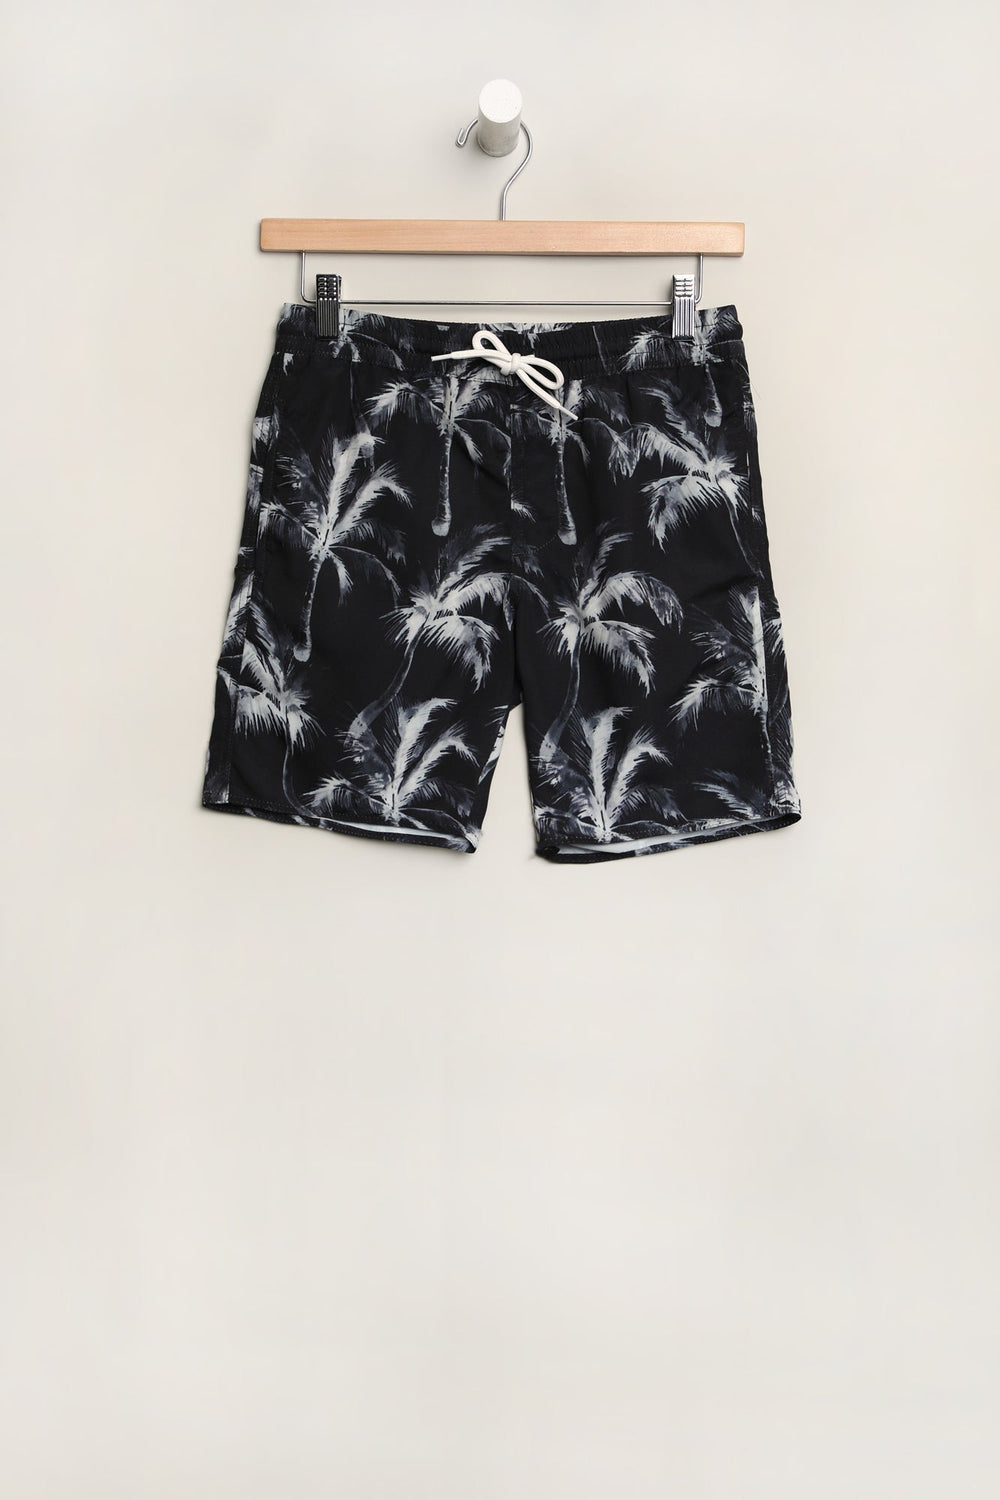 West49 Youth Palm Tree Print Beach Shorts West49 Youth Palm Tree Print Beach Shorts